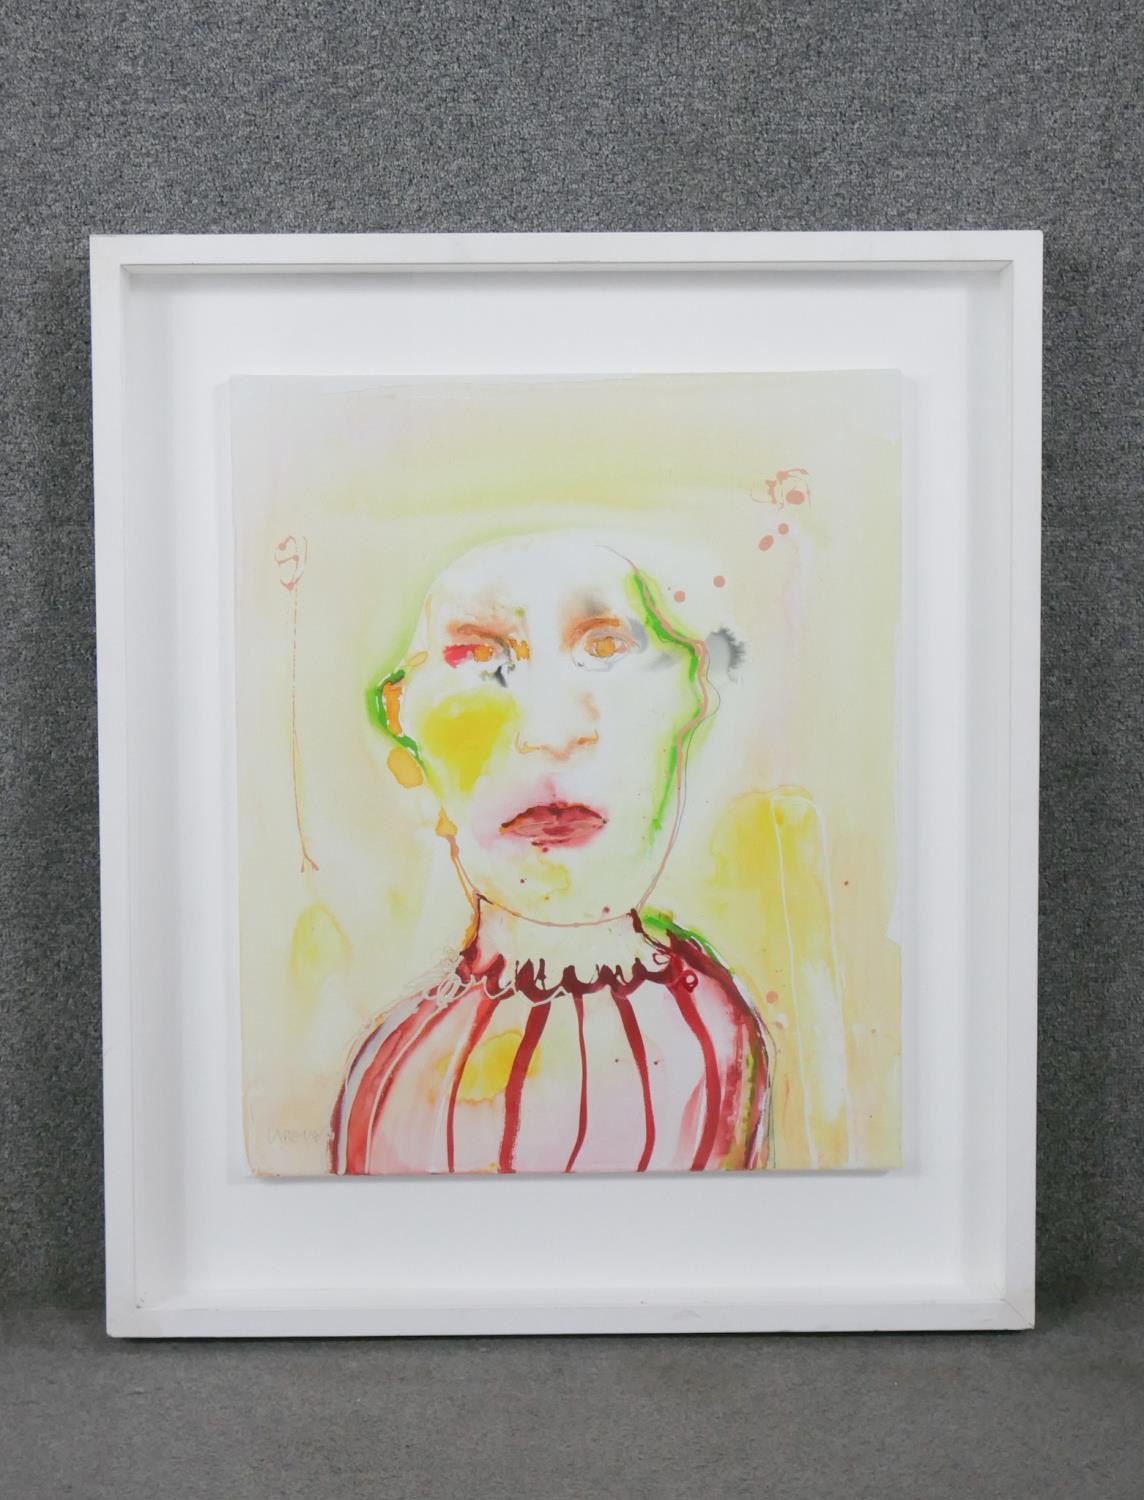 Whitney McVeigh, American (1968) coloured portrait, watercolor, acrylic and mixed media on canvas, - Image 2 of 6